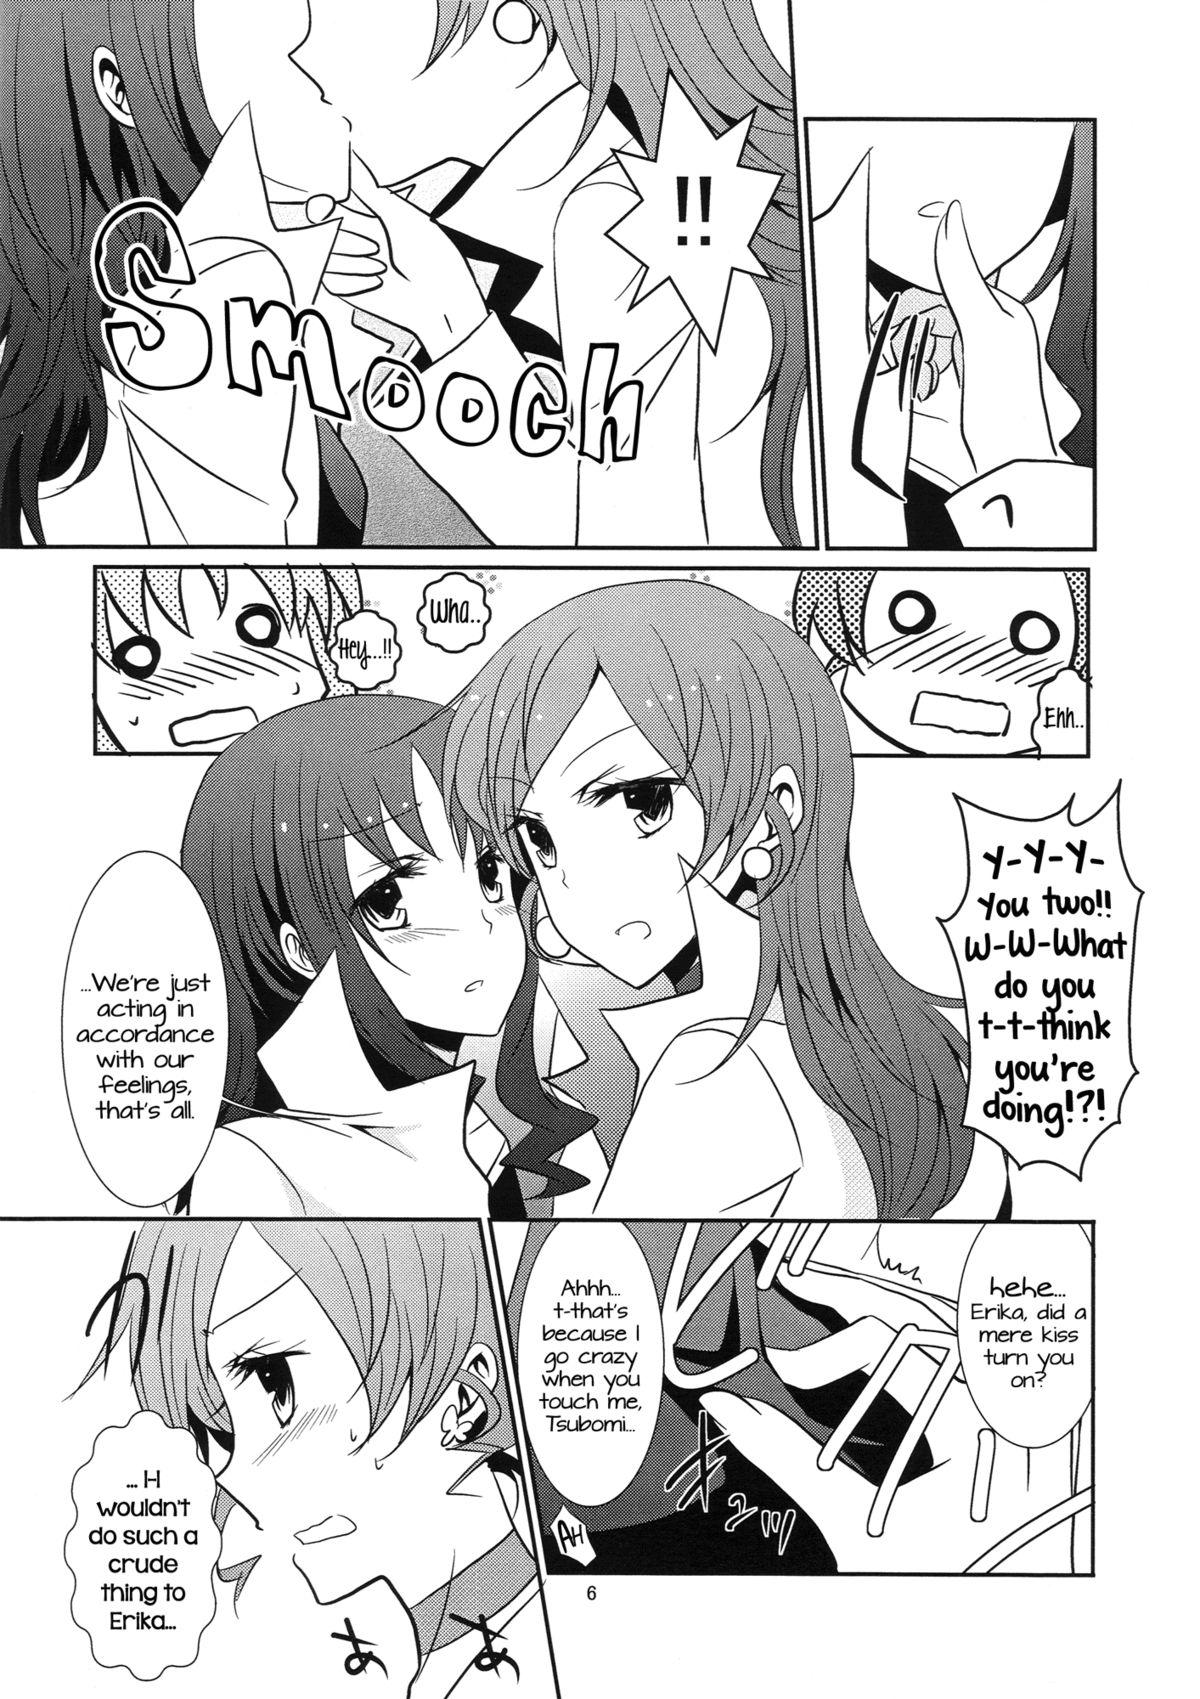 Anale 4ever Yours - Heartcatch precure Cei - Page 7